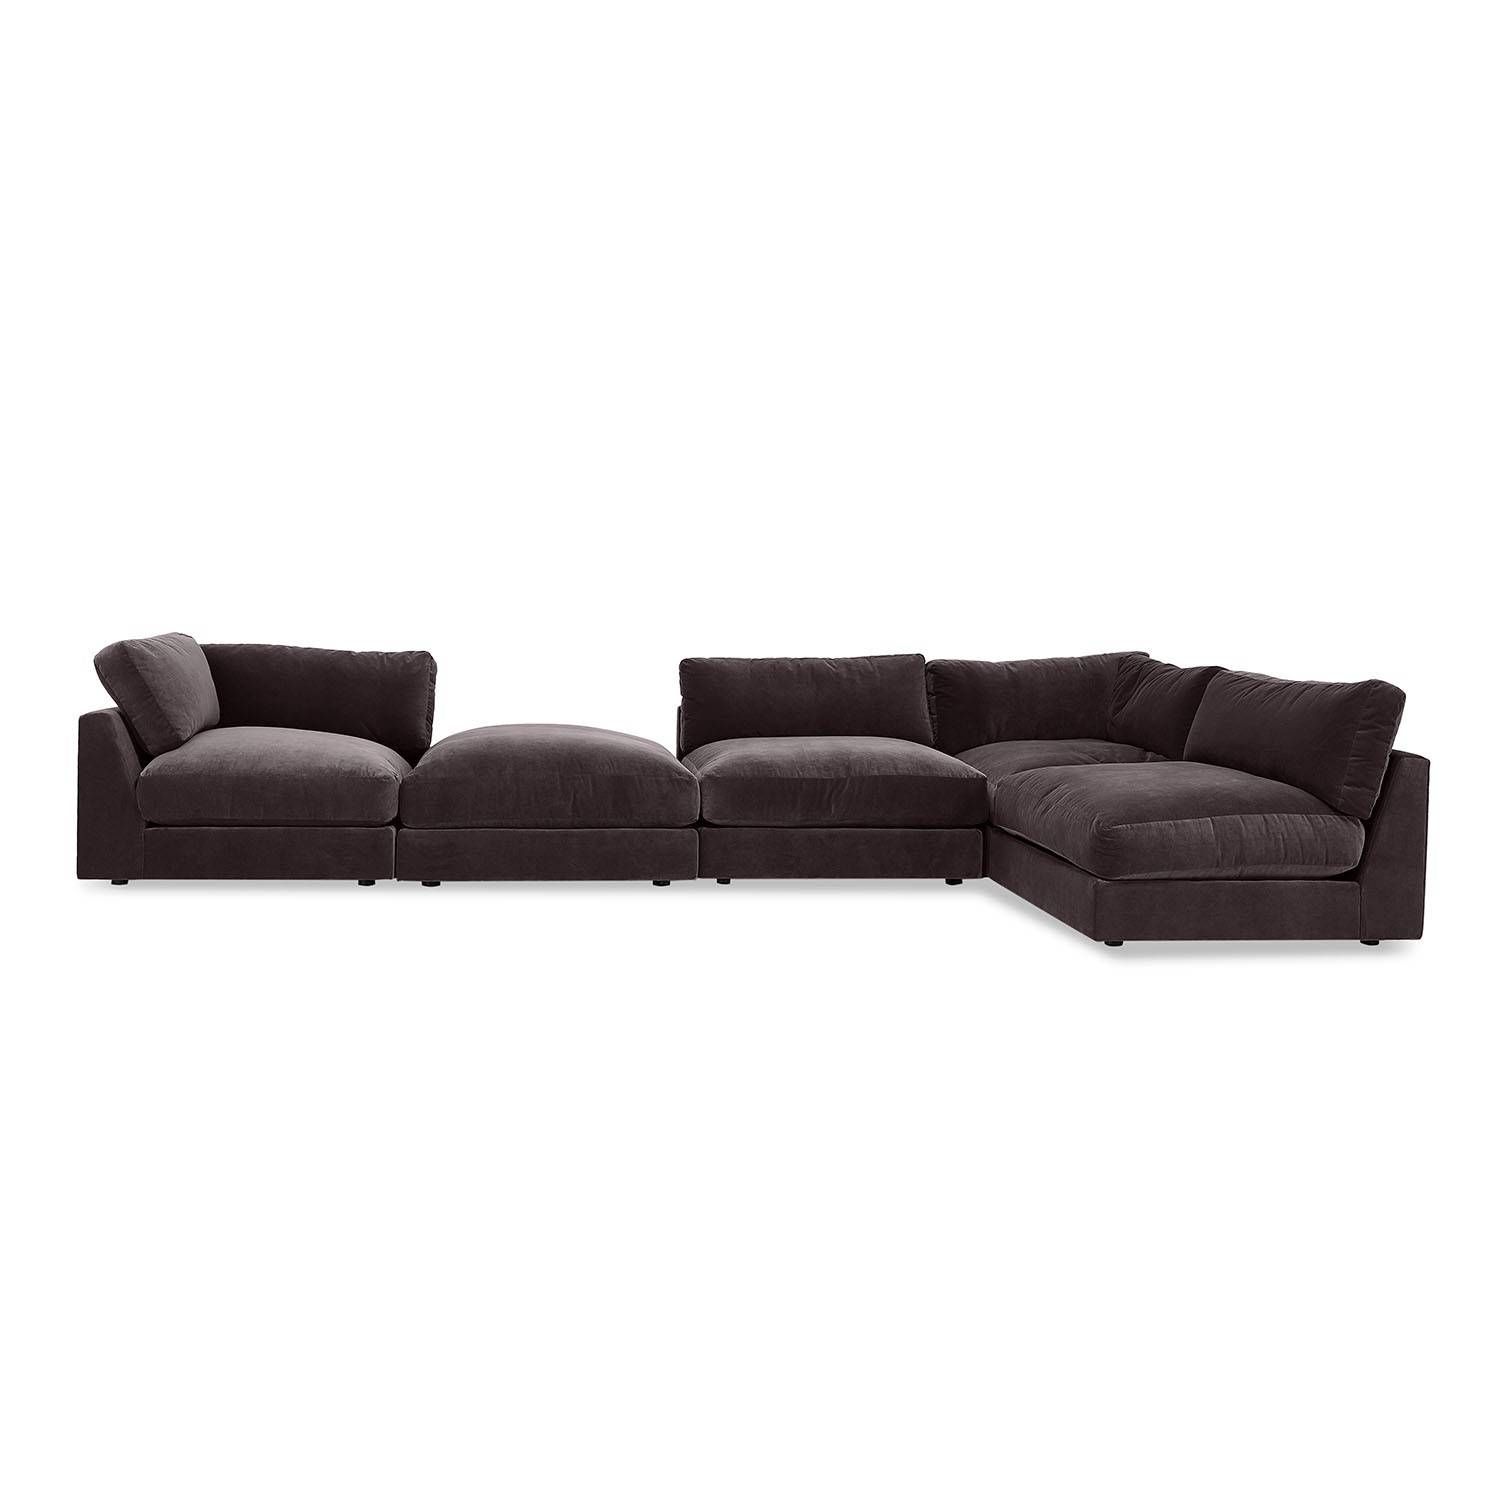 52 Cheap Sectional Sofas Under 400, Shopping Online For The Best In Sectional Sofas Under  (View 25 of 30)